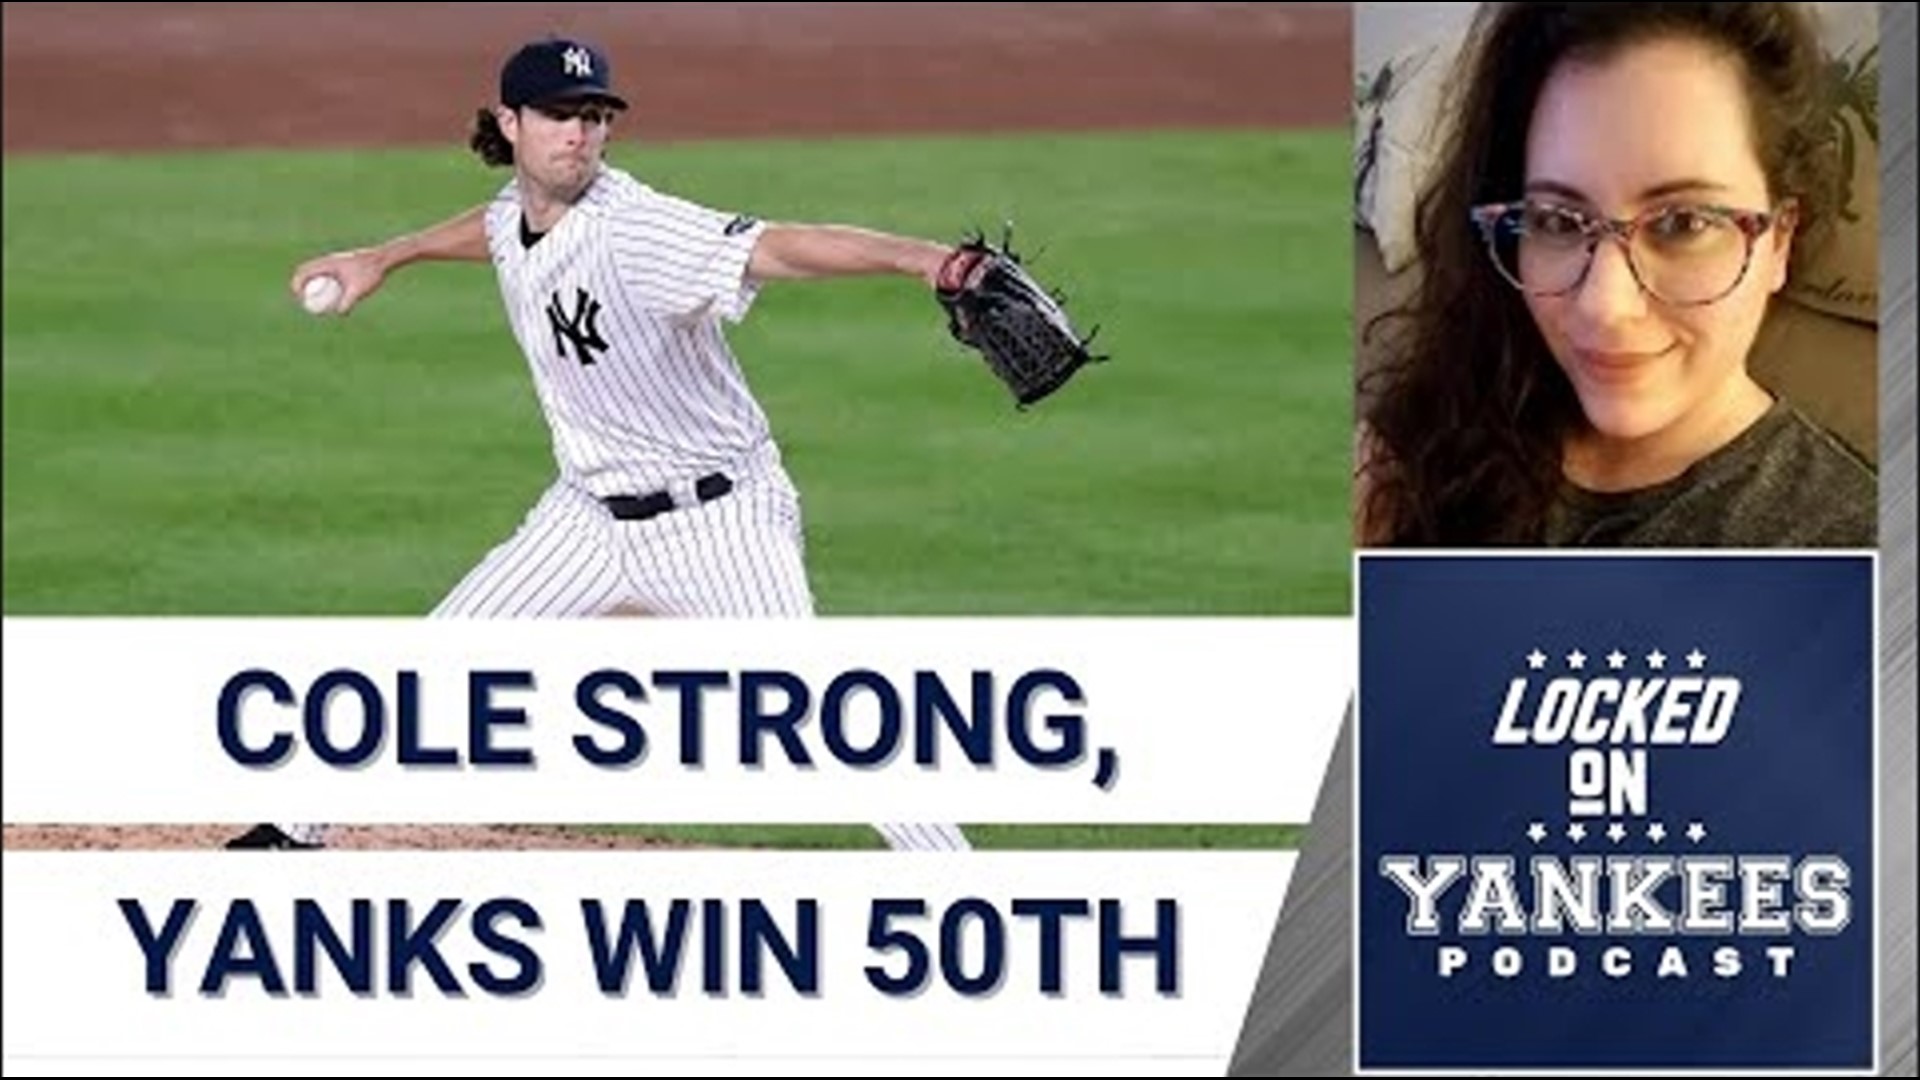 Gerrit Cole had a no-hitter which got broken up then Clay Holmes' historical scoreless inning streak came to end but Aaron Hicks saved the day.